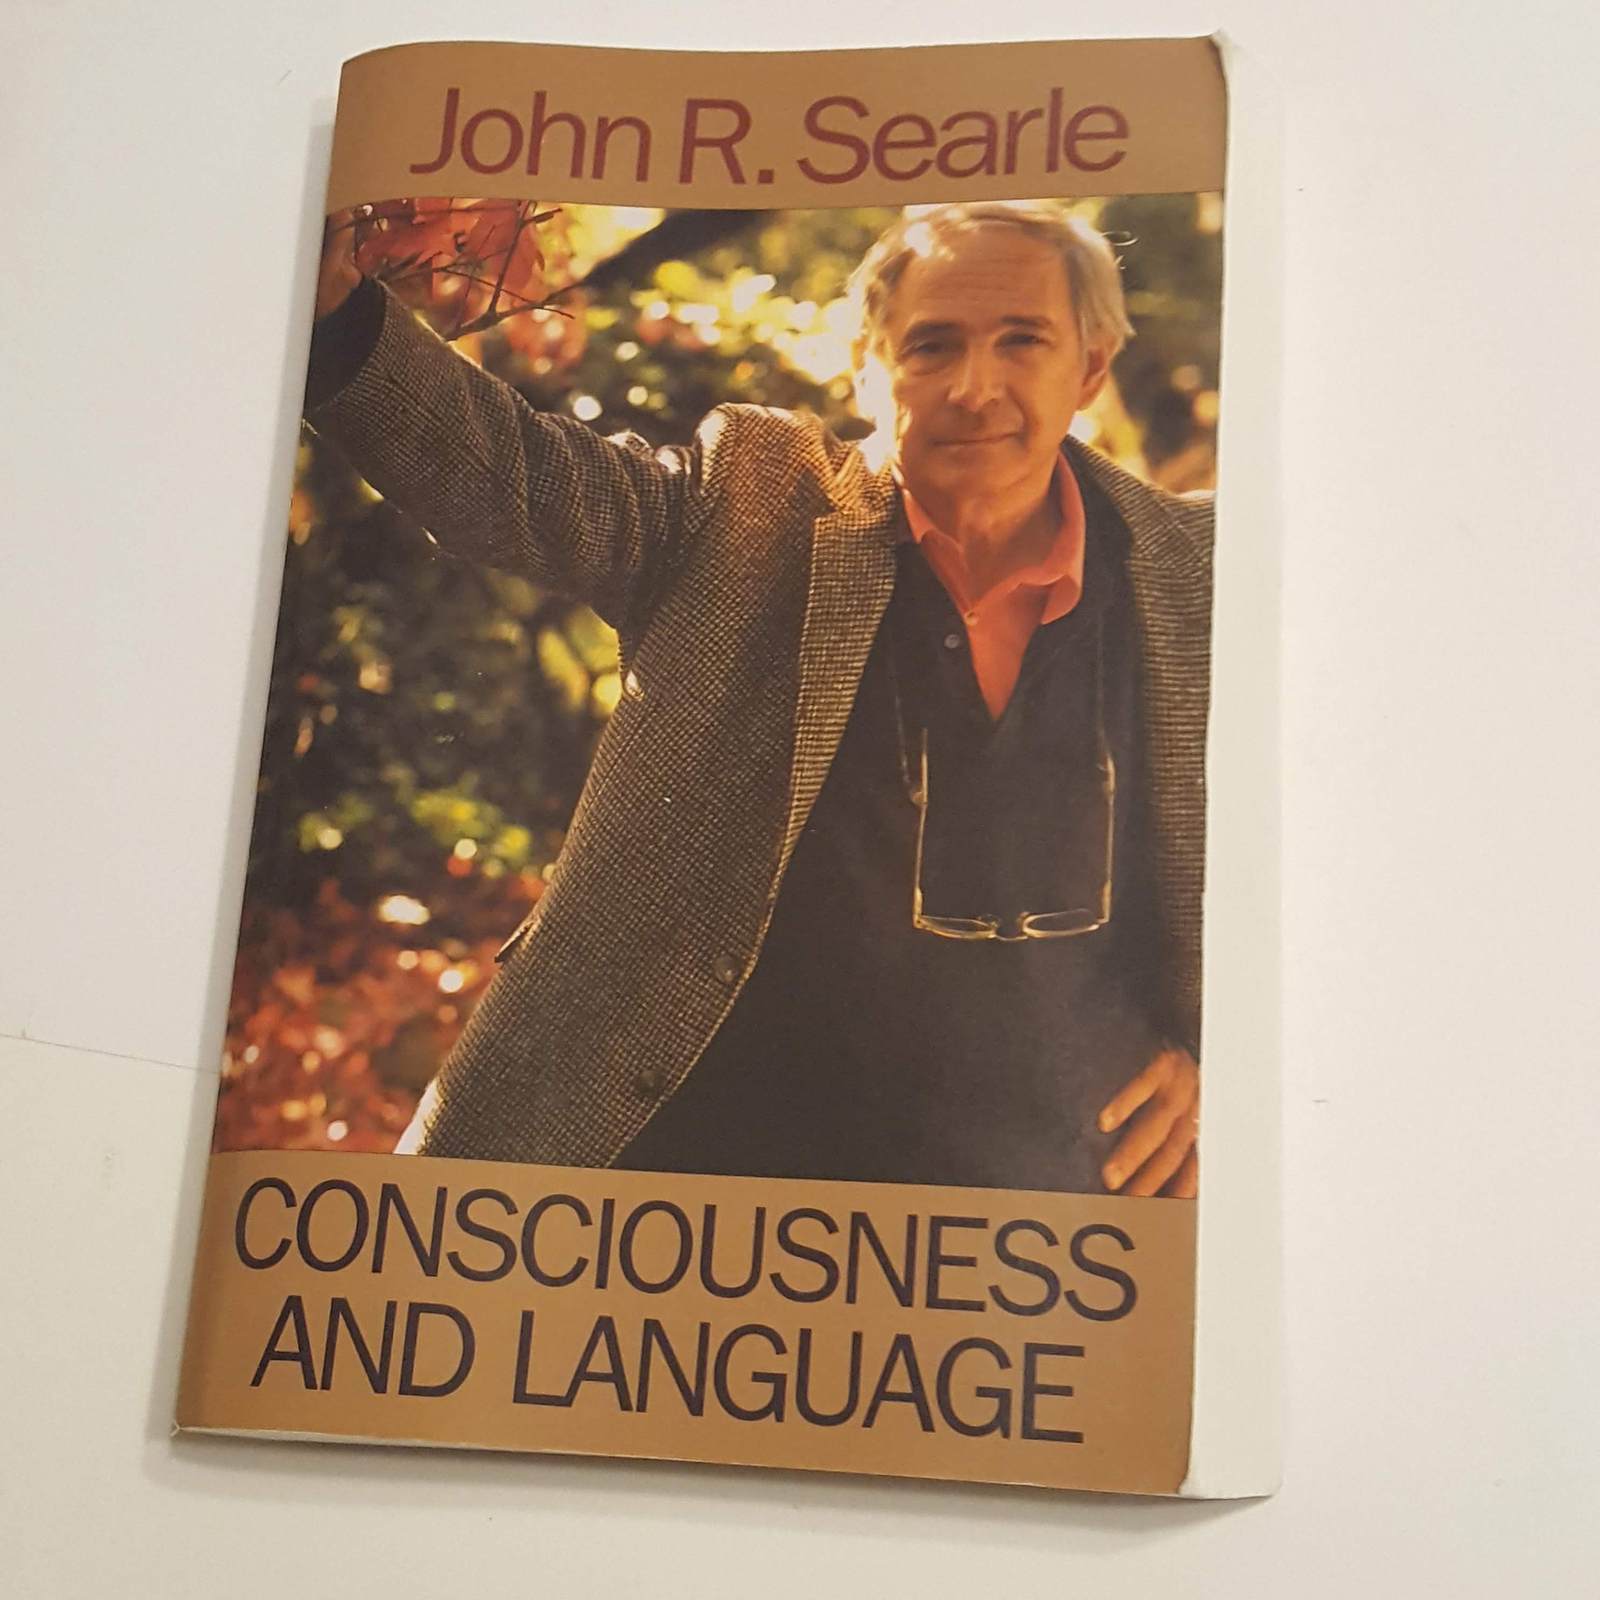 Primary image for Consciousness and Language by John R. Searle. PaperbackISBN-10: 0521597447